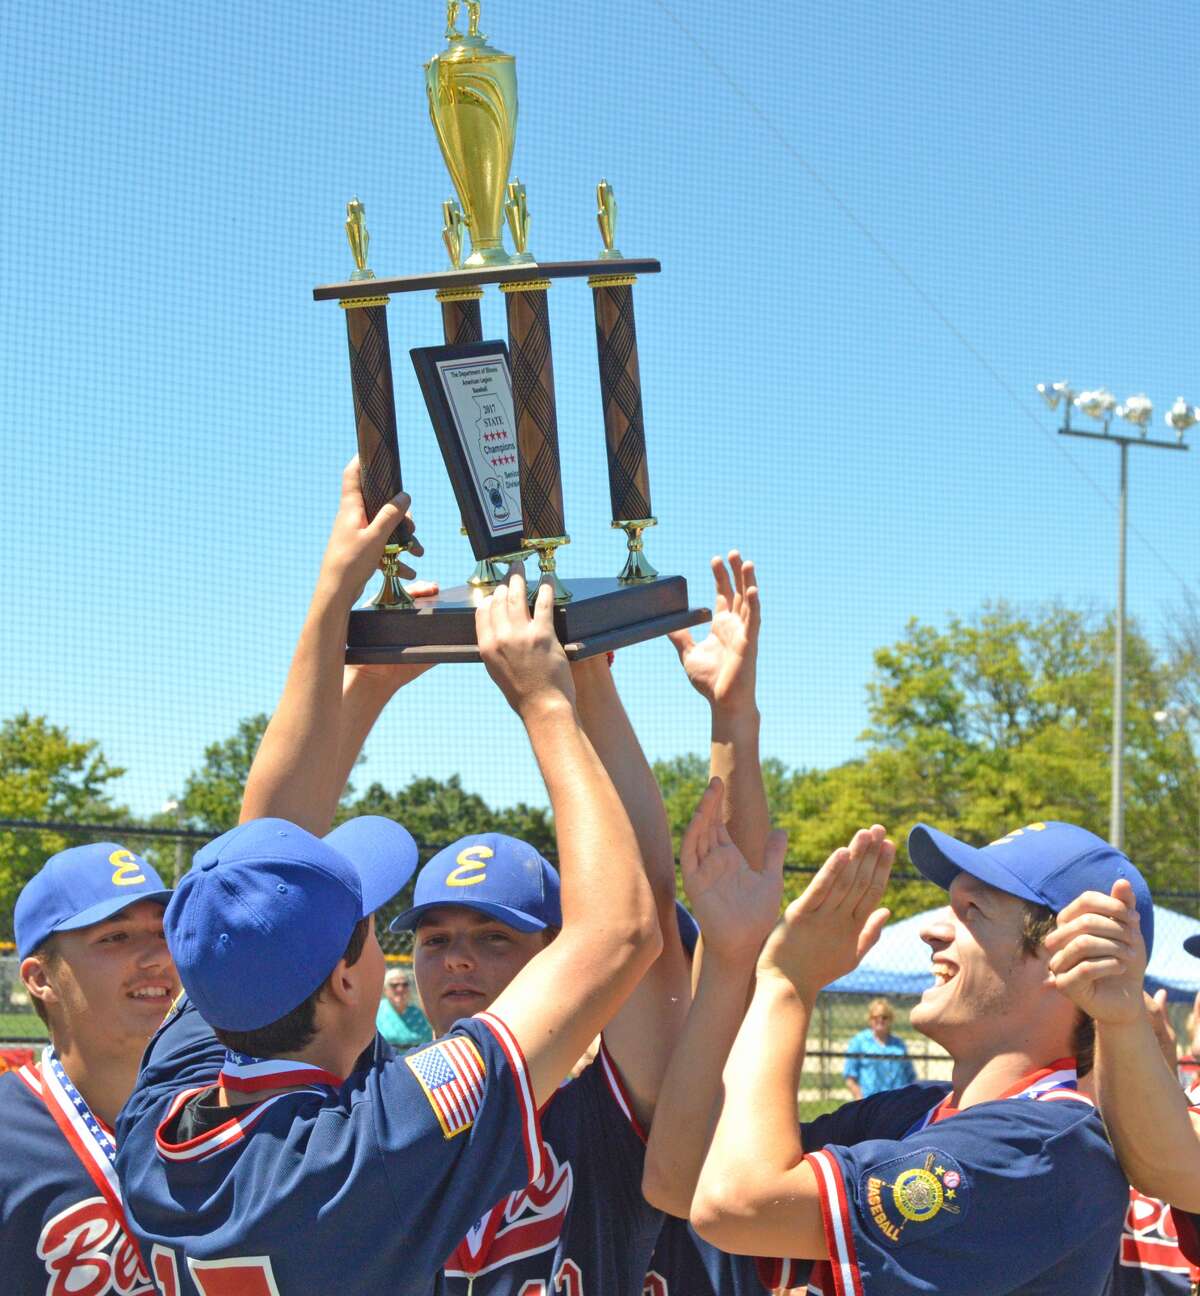 Edwardsville Bears players hoist the first-place trophy after beating Danville on Saturday in the championship game of the senior American Legion tournament at Wabash Park in Rantoul.